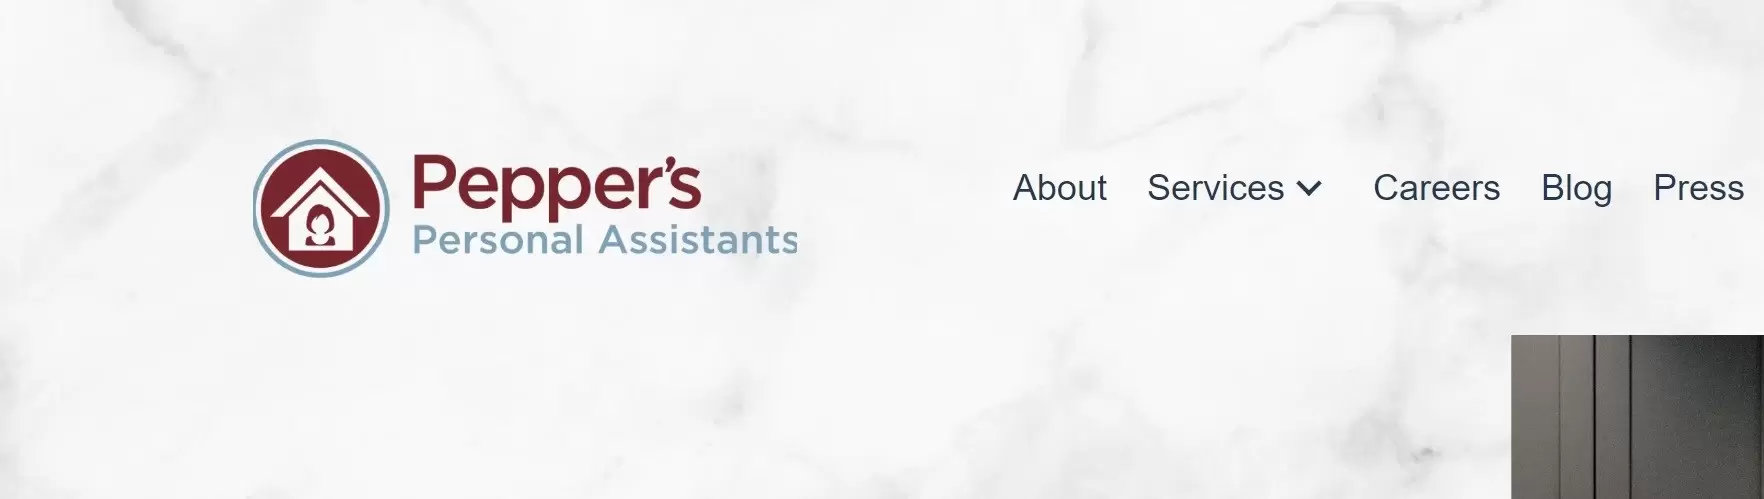 Pepper's Personal Assistants company profile and reviews